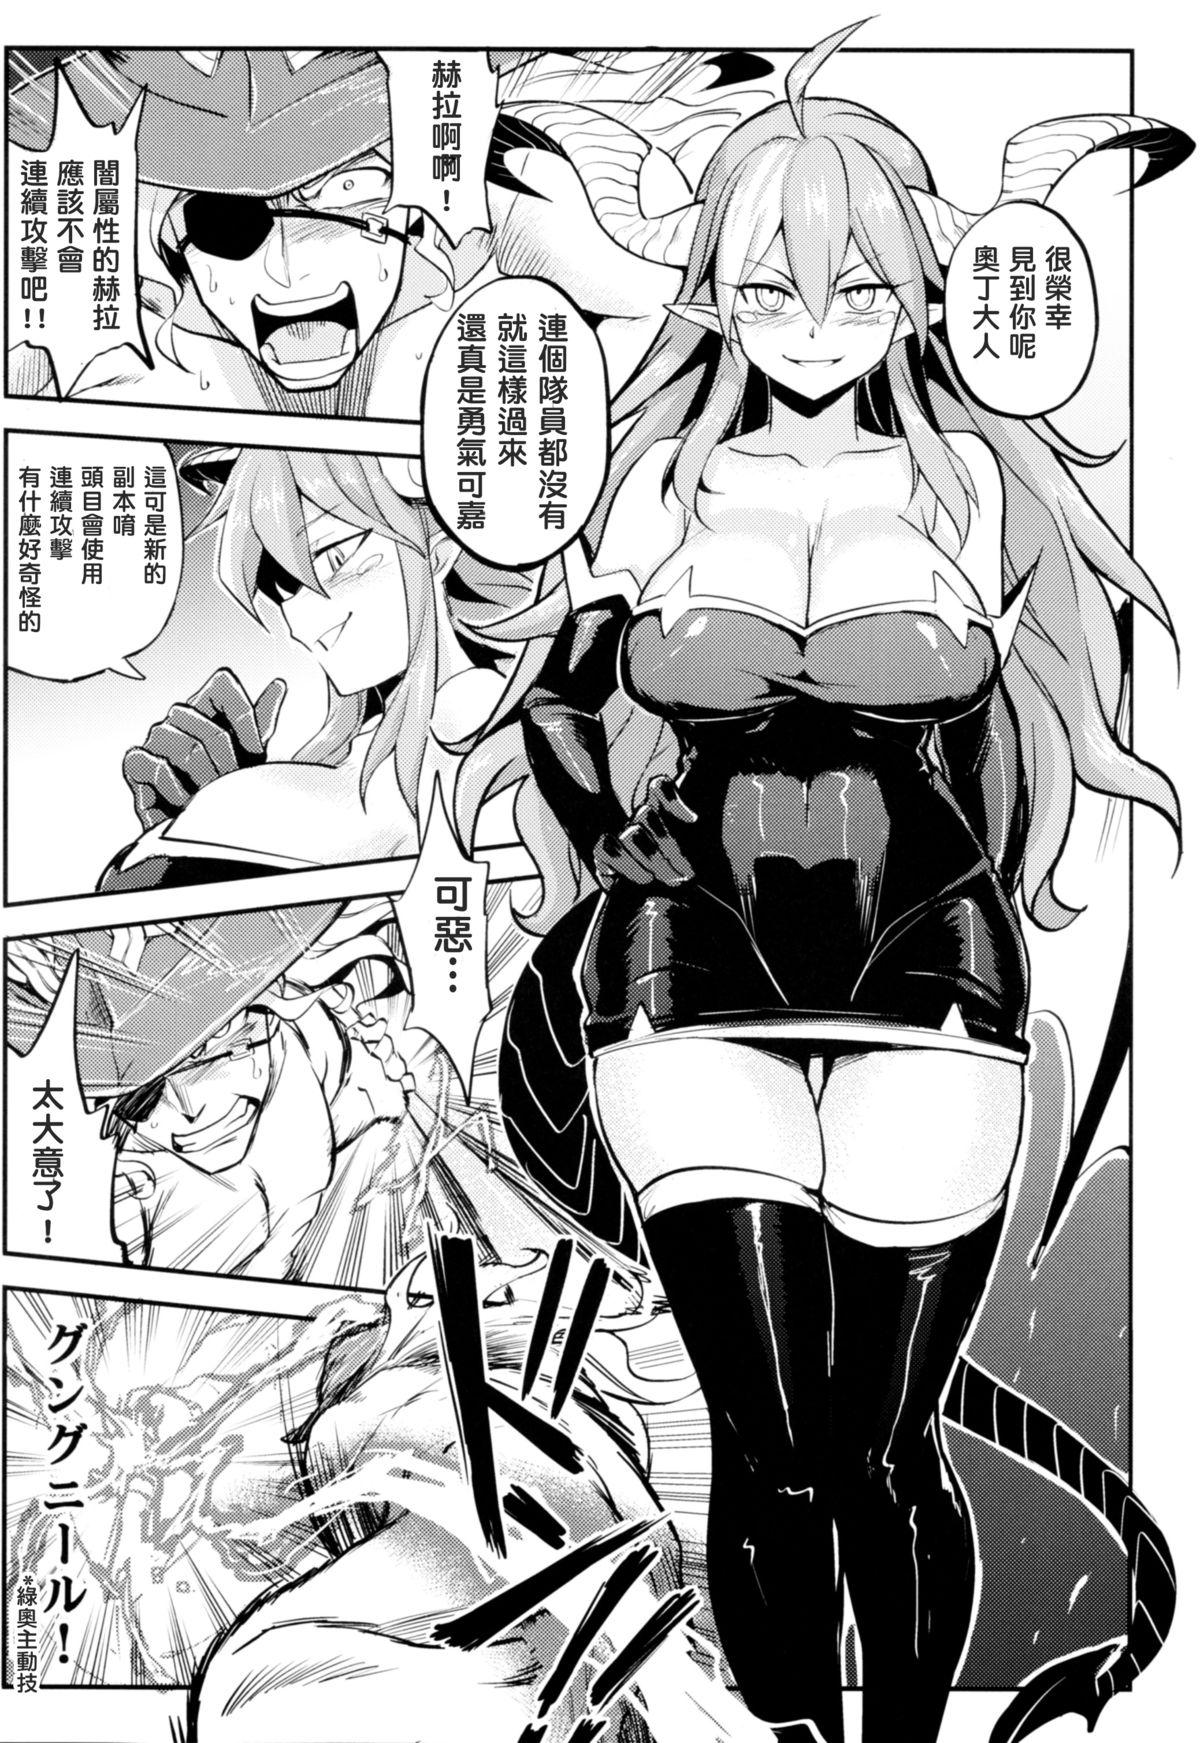 Busty Ganbare! Odin-sama! - Puzzle and dragons Rabo - Page 7